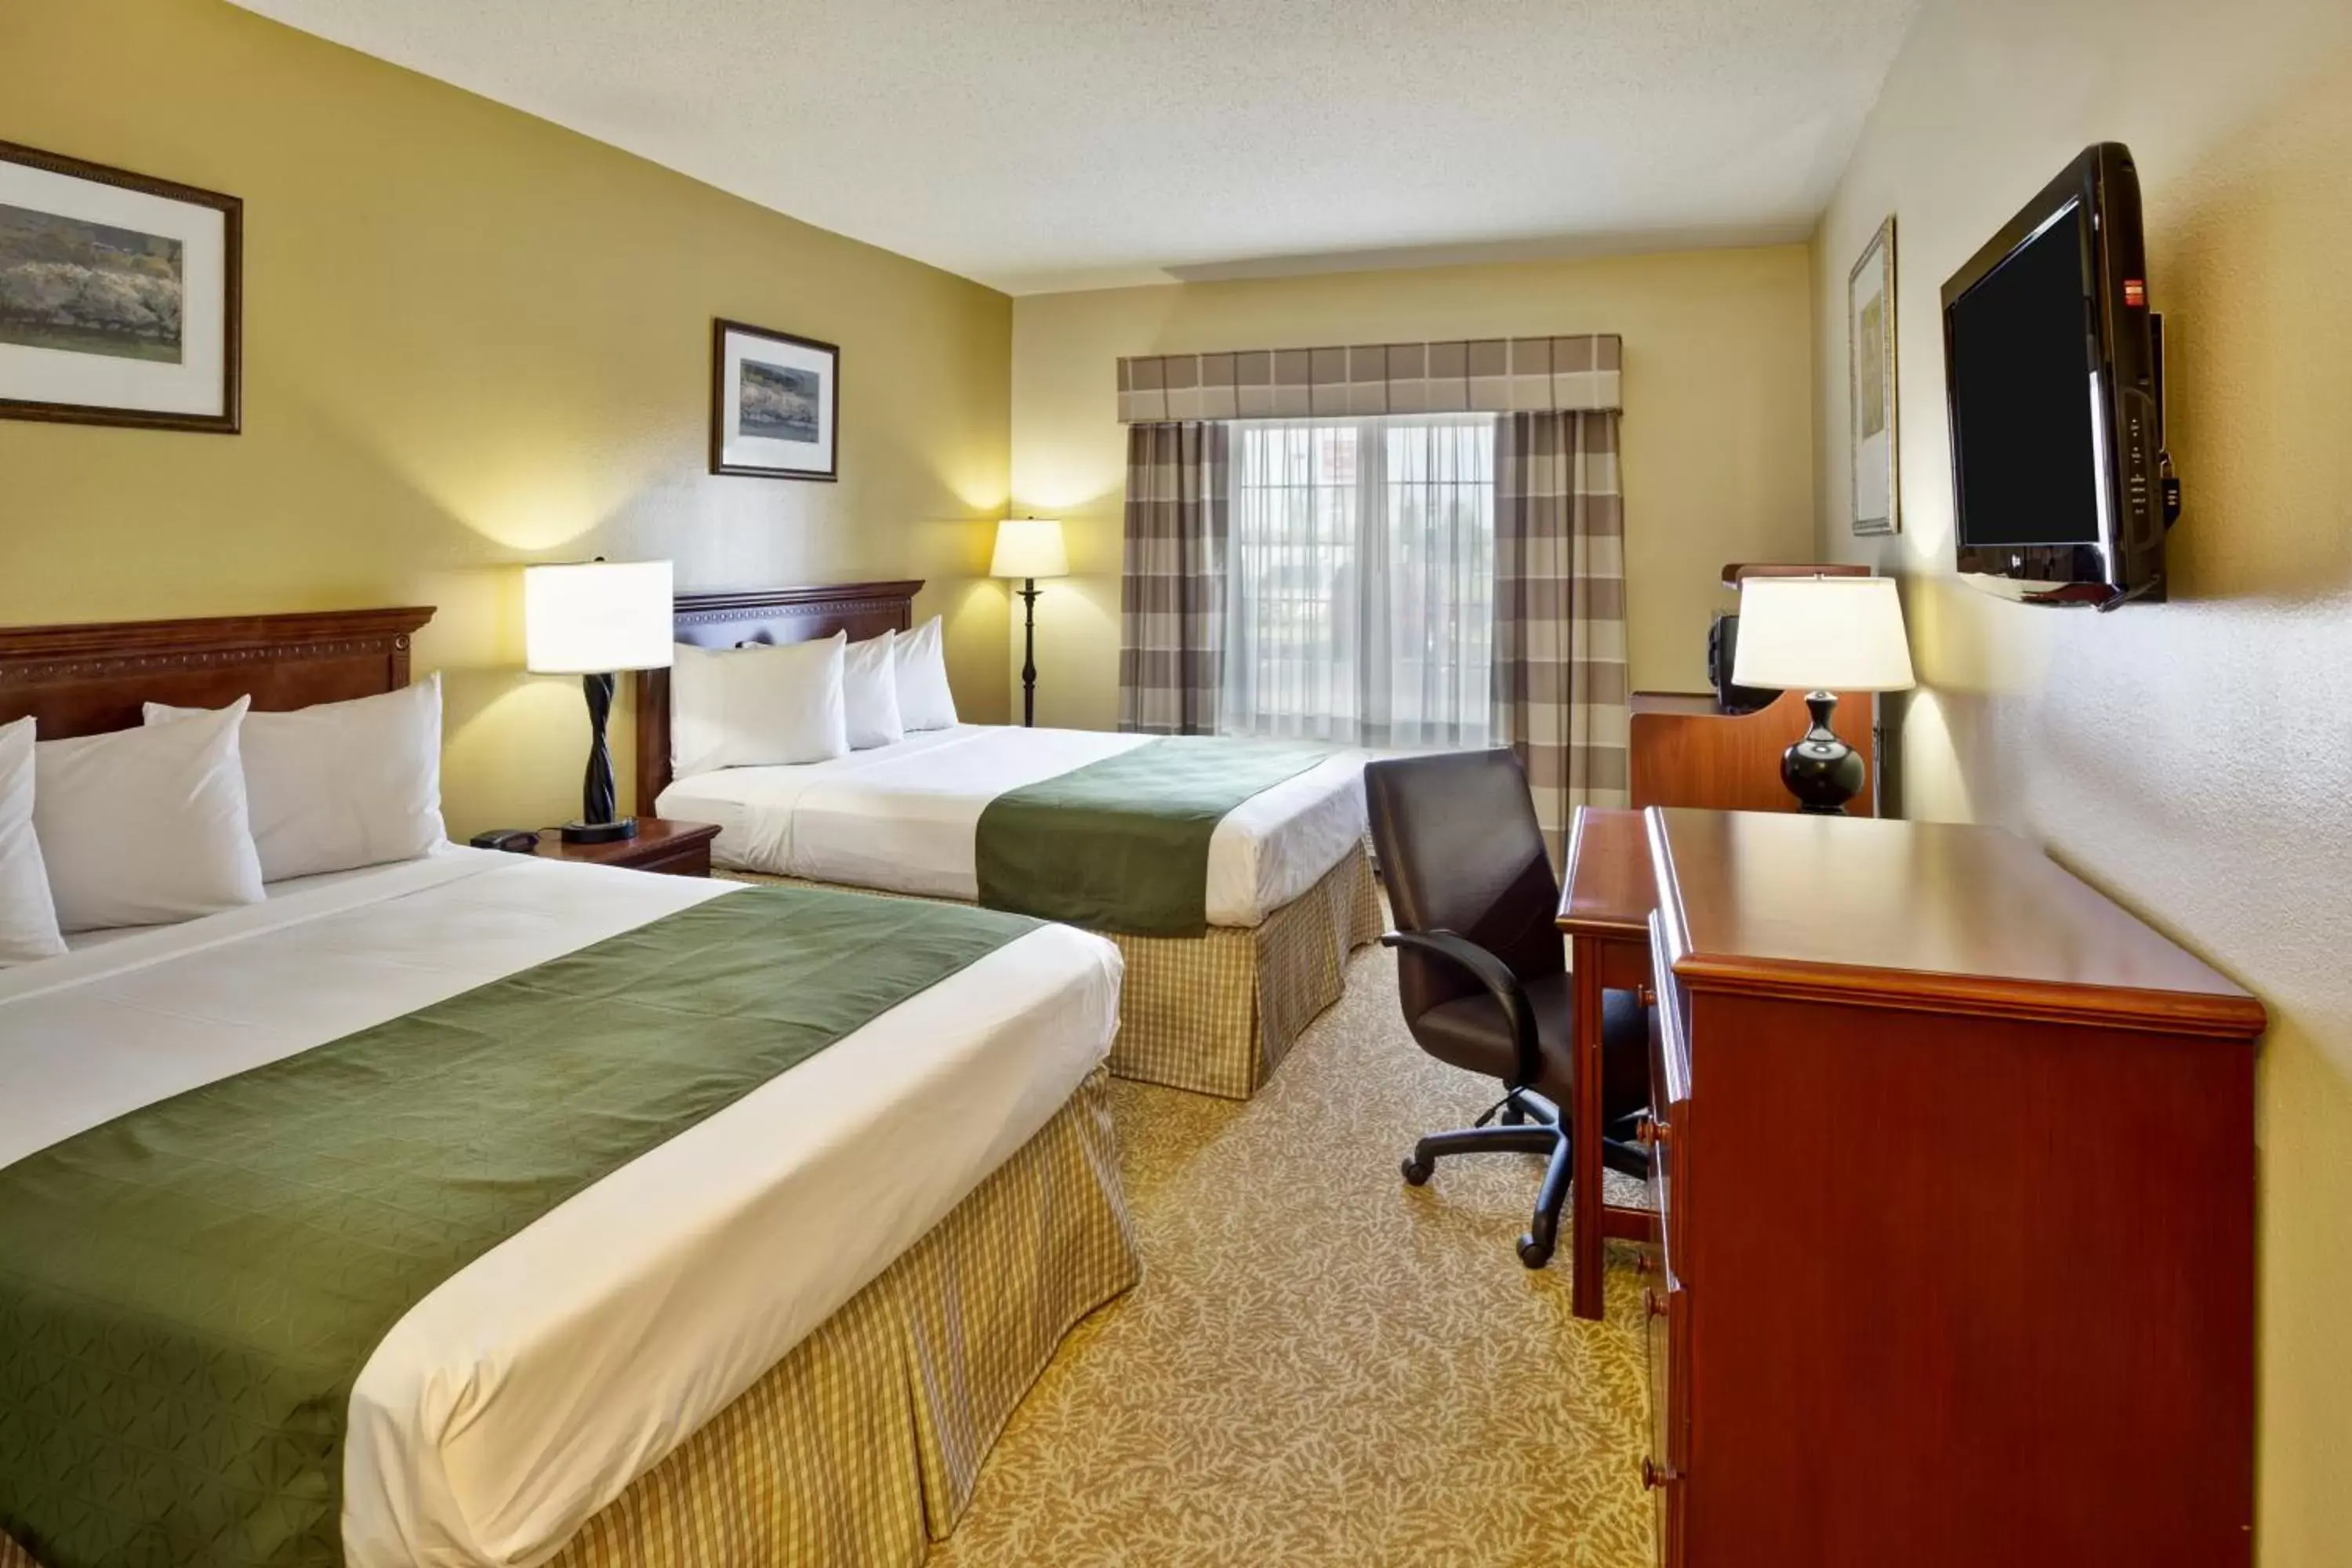 Bedroom in Country Inn & Suites by Radisson, Marion, OH